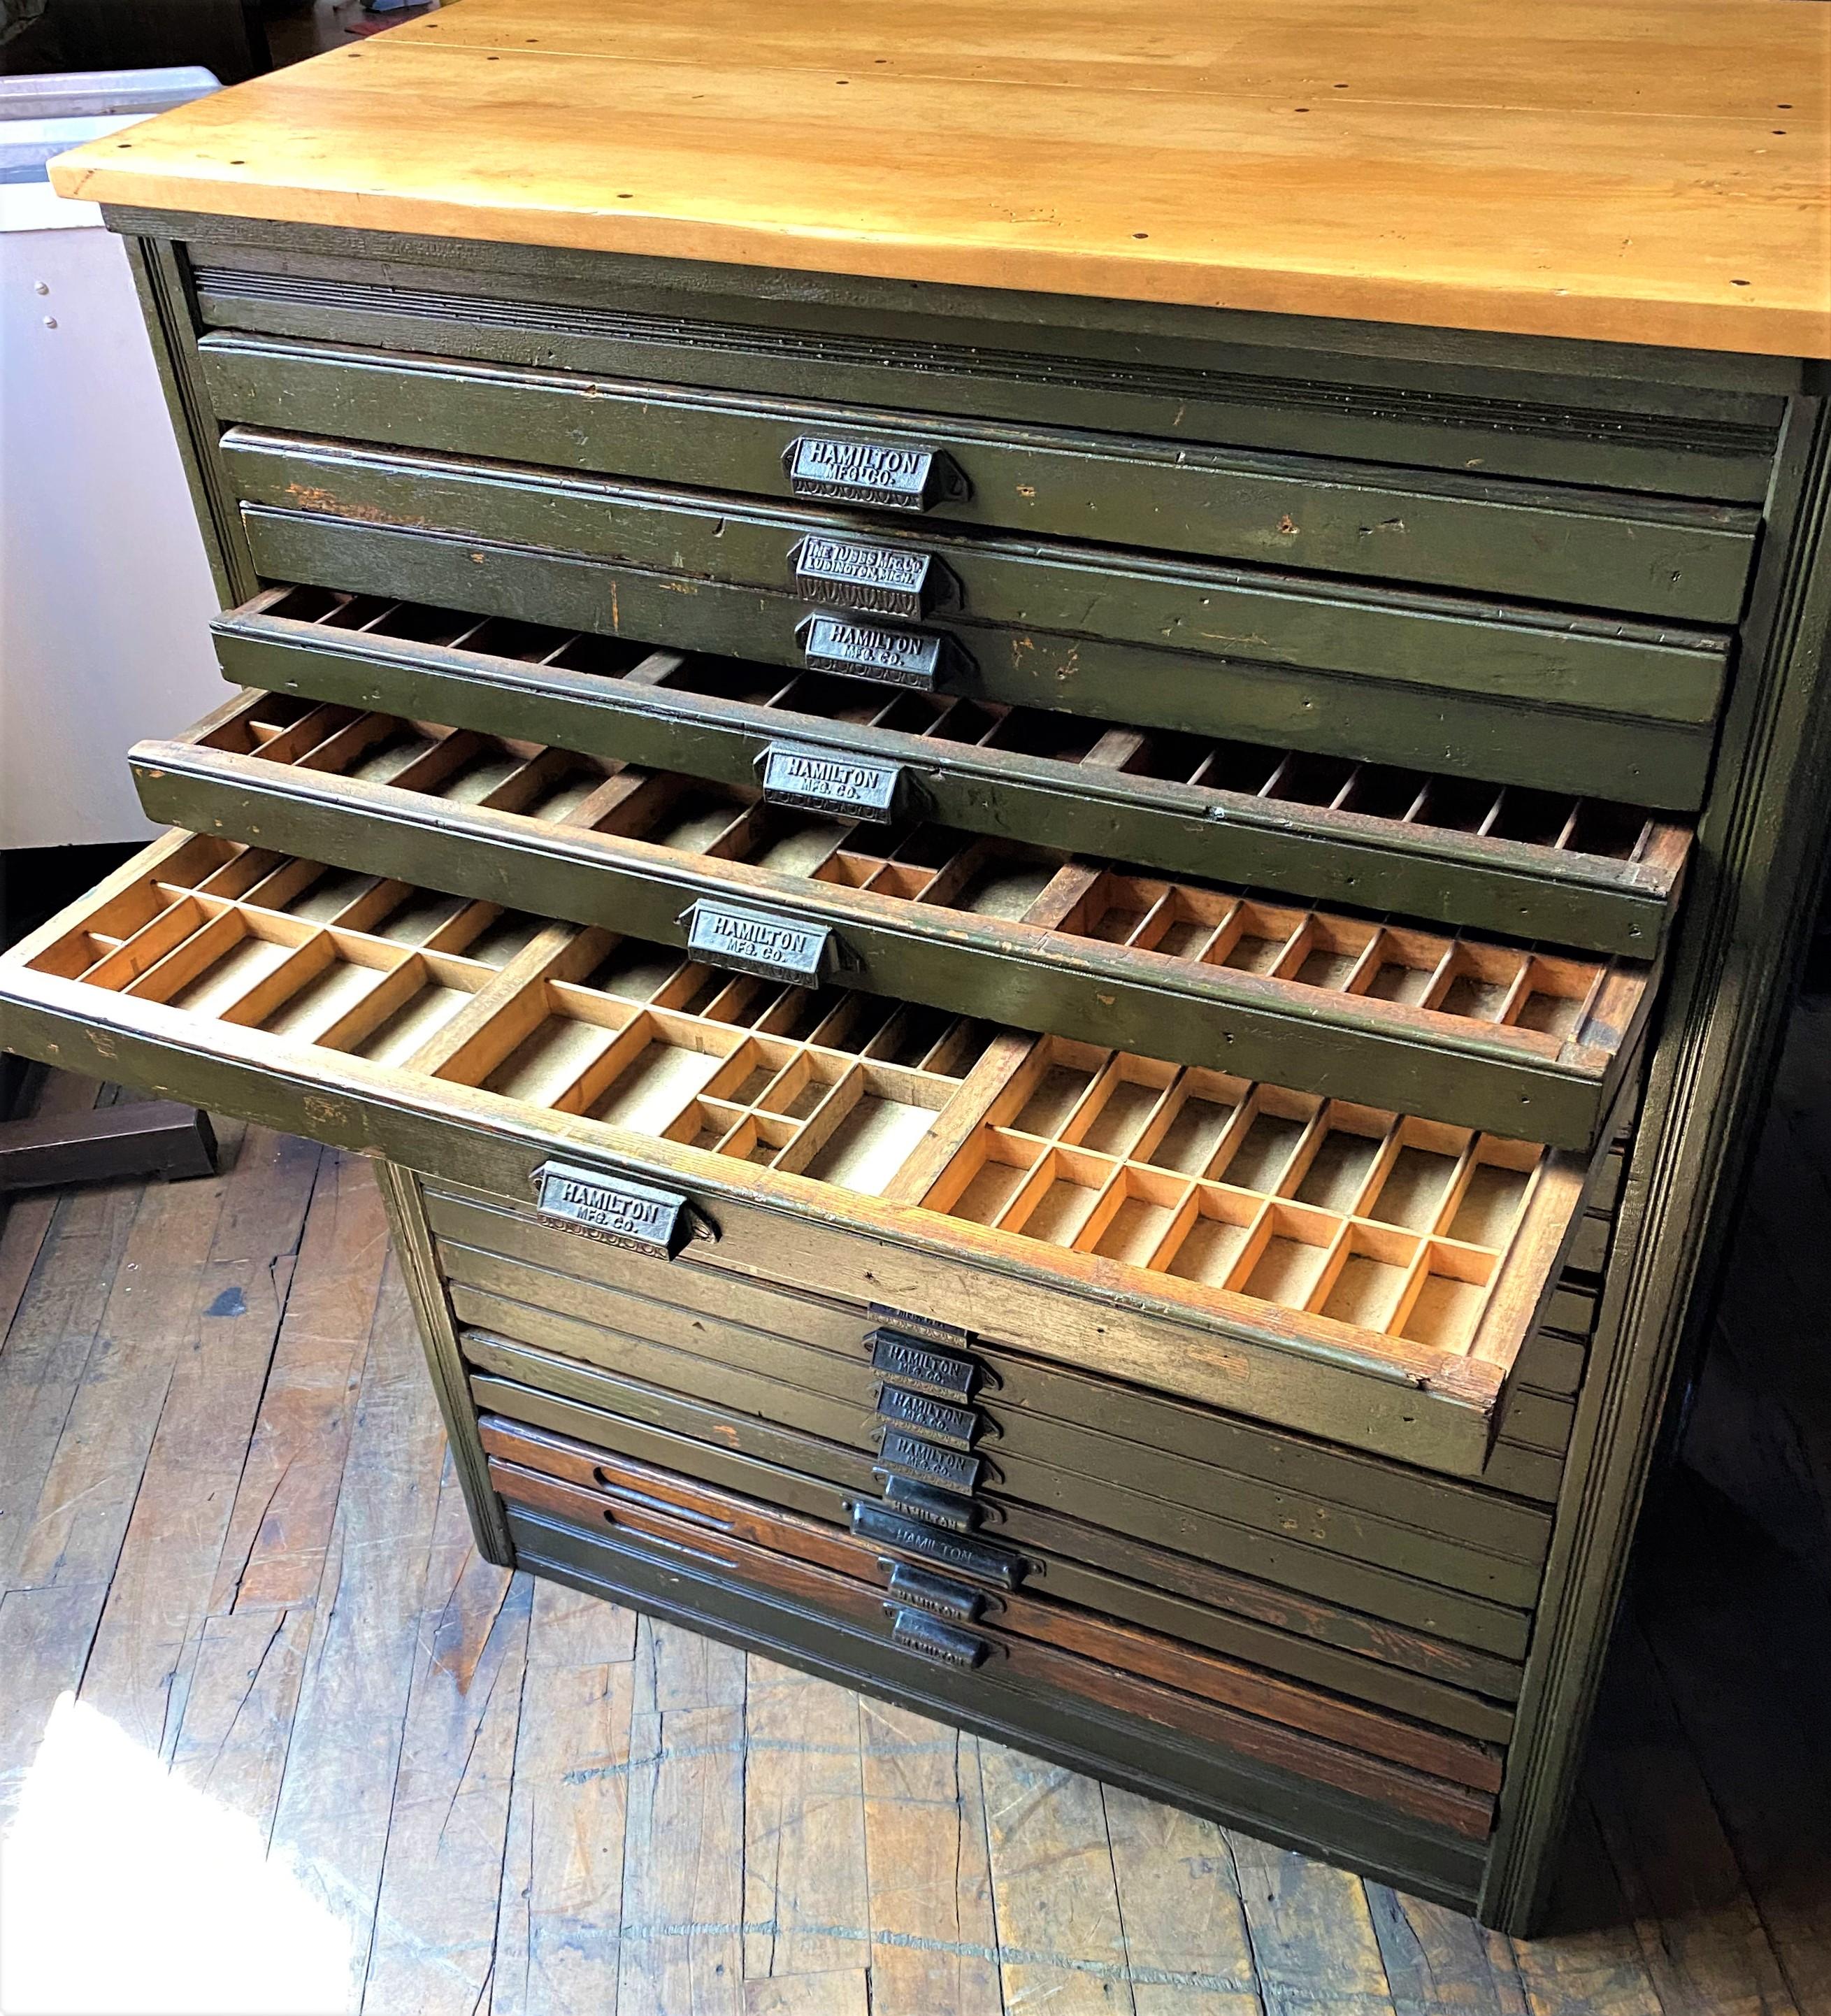 Hamilton printer's cabinet with 20 Drawers
Measures: Overall dimensions: 36